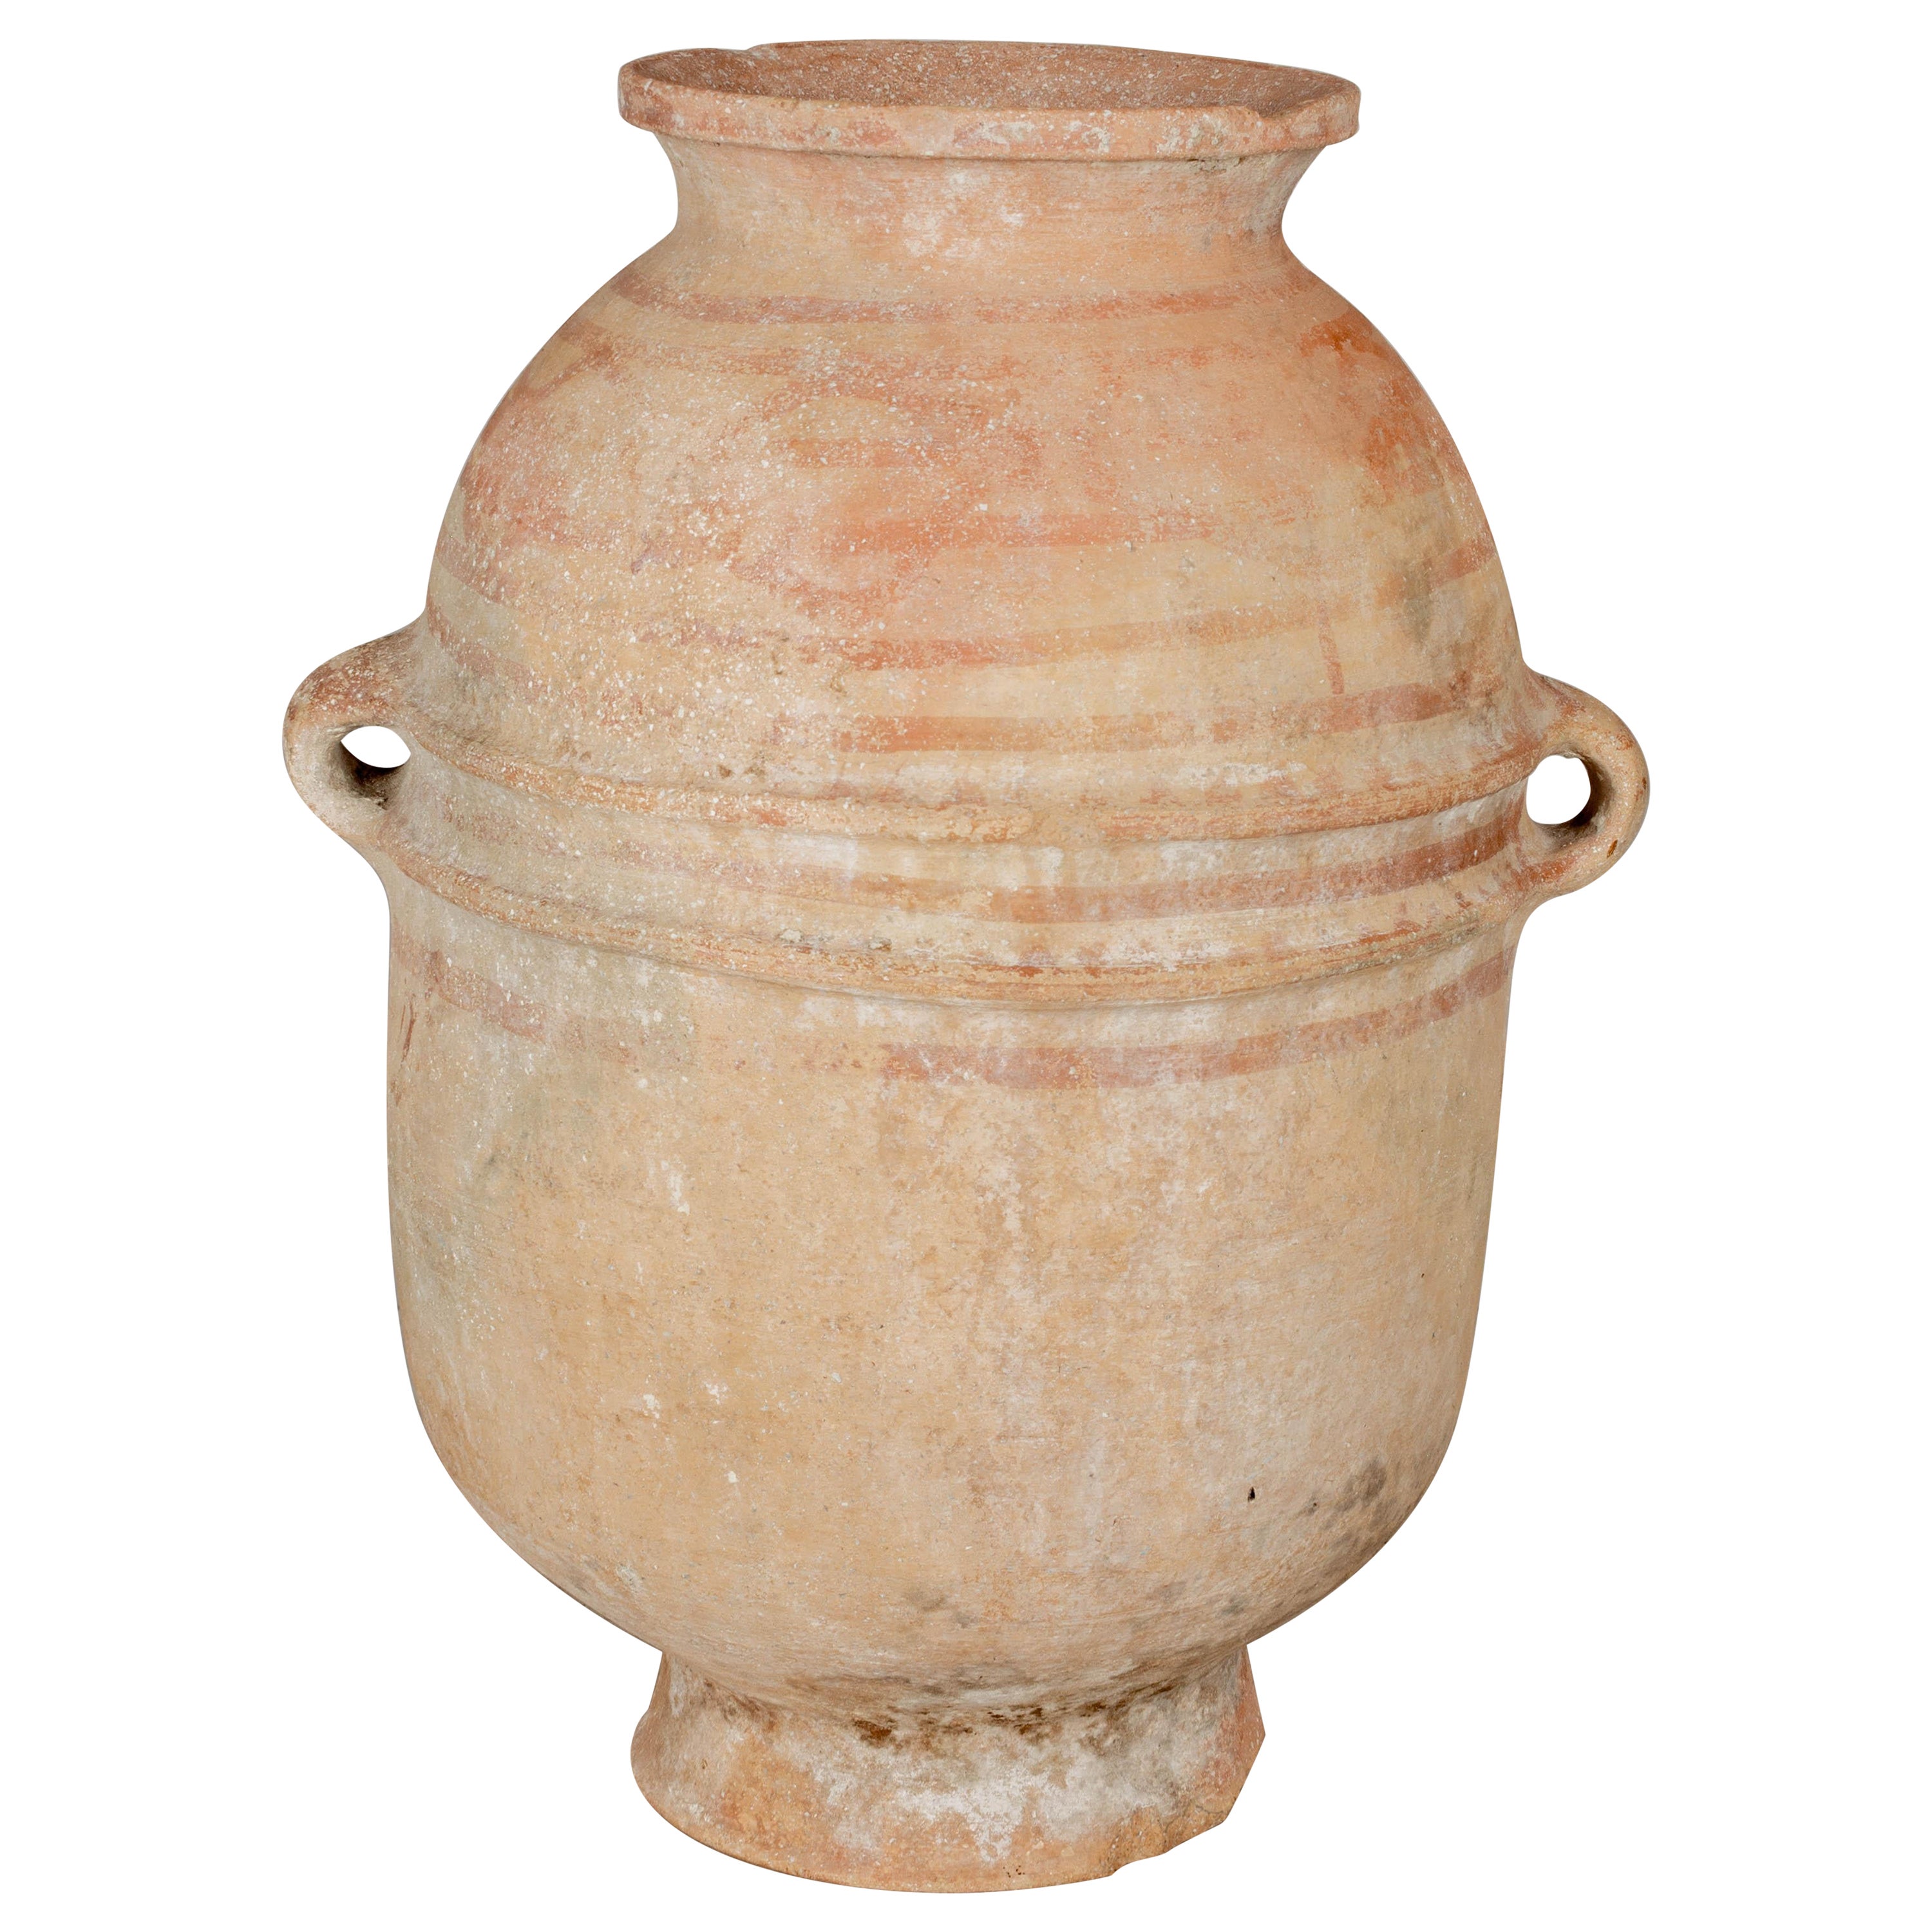 Large Moroccan Terracotta Pottery Water Jar